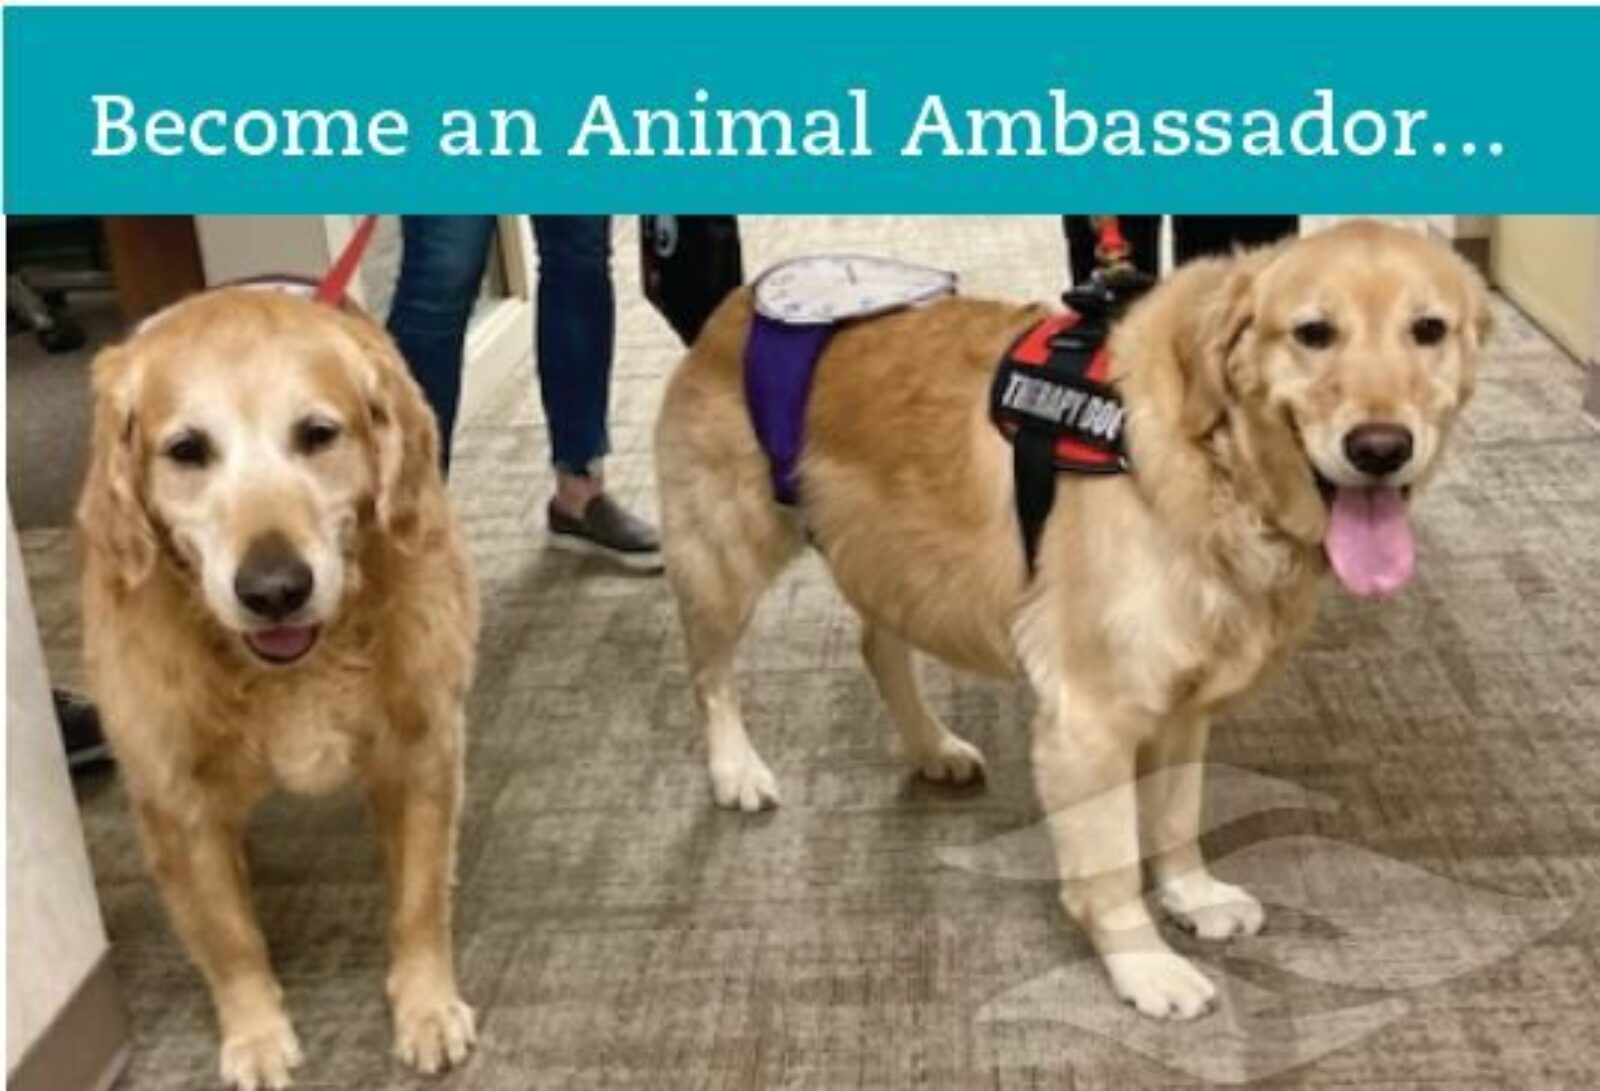 Your Dog Could be an Animal Ambassador!